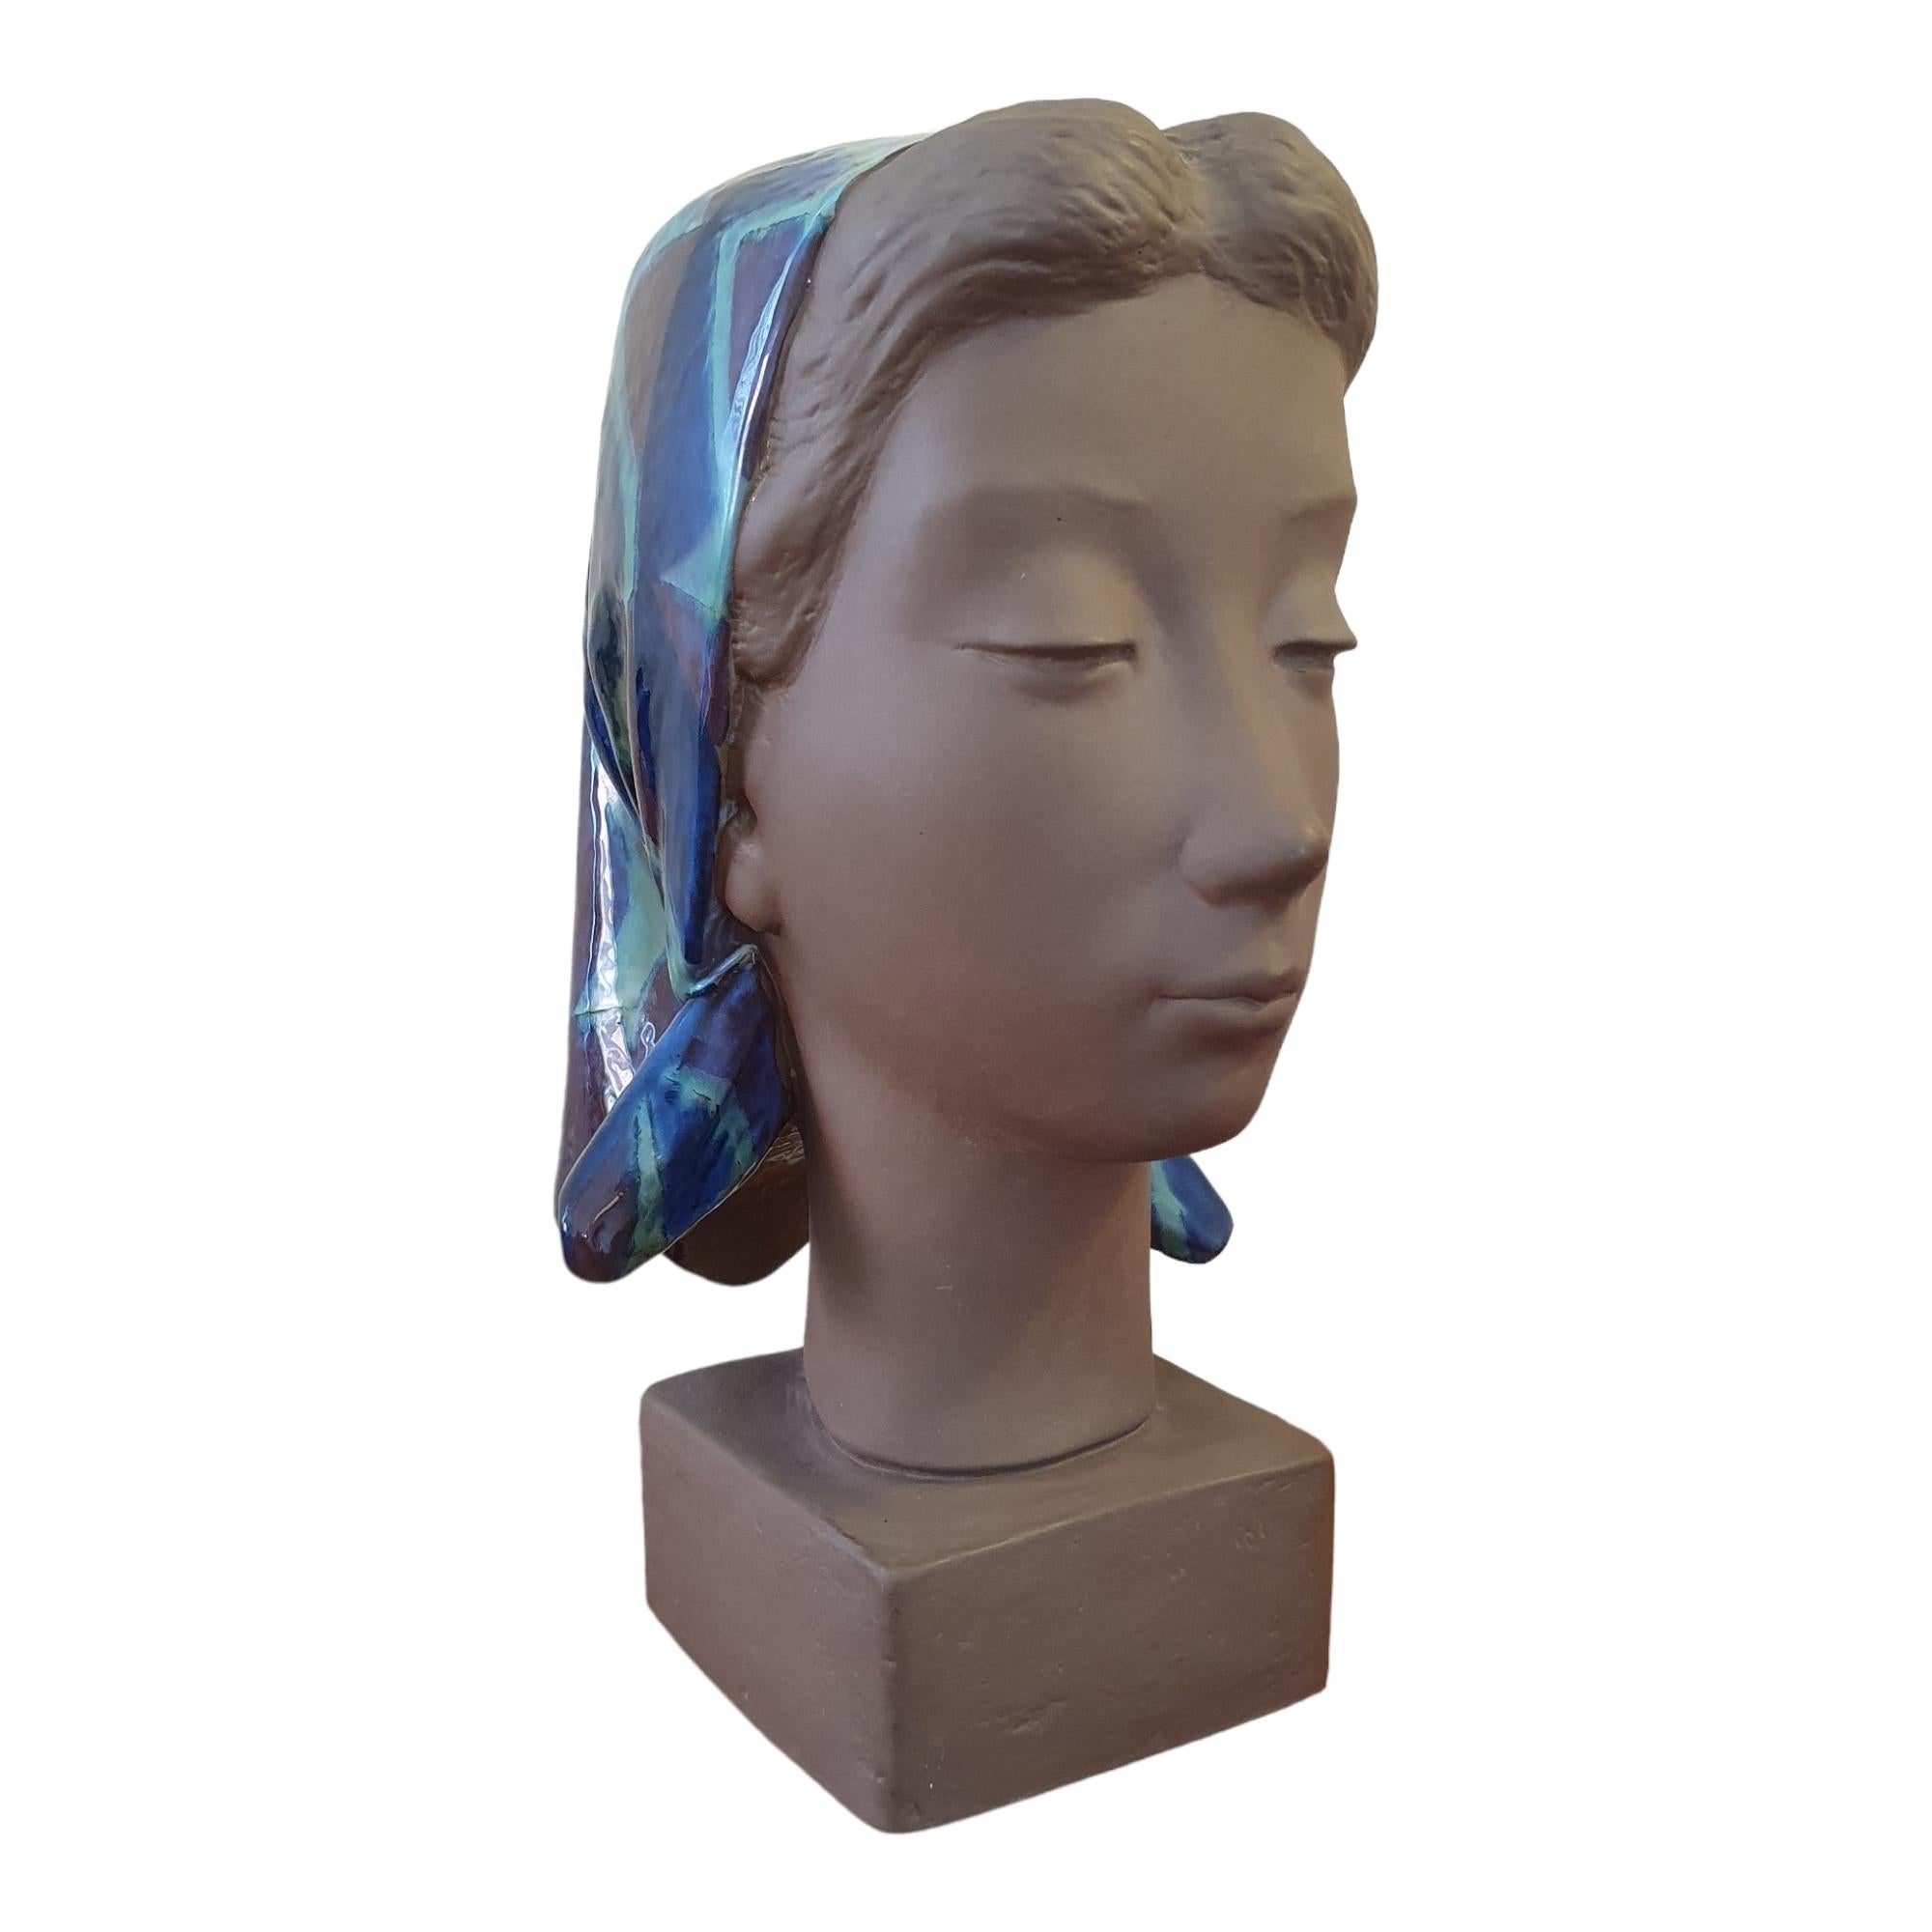 A large and beautiful bust of a woman with closed eyes and a serene look on her face. This is a classic Johannes Hedegaard sculpture with a playful balance between the matte finish of the ceramic and typical blue and greenish glaze that is almost